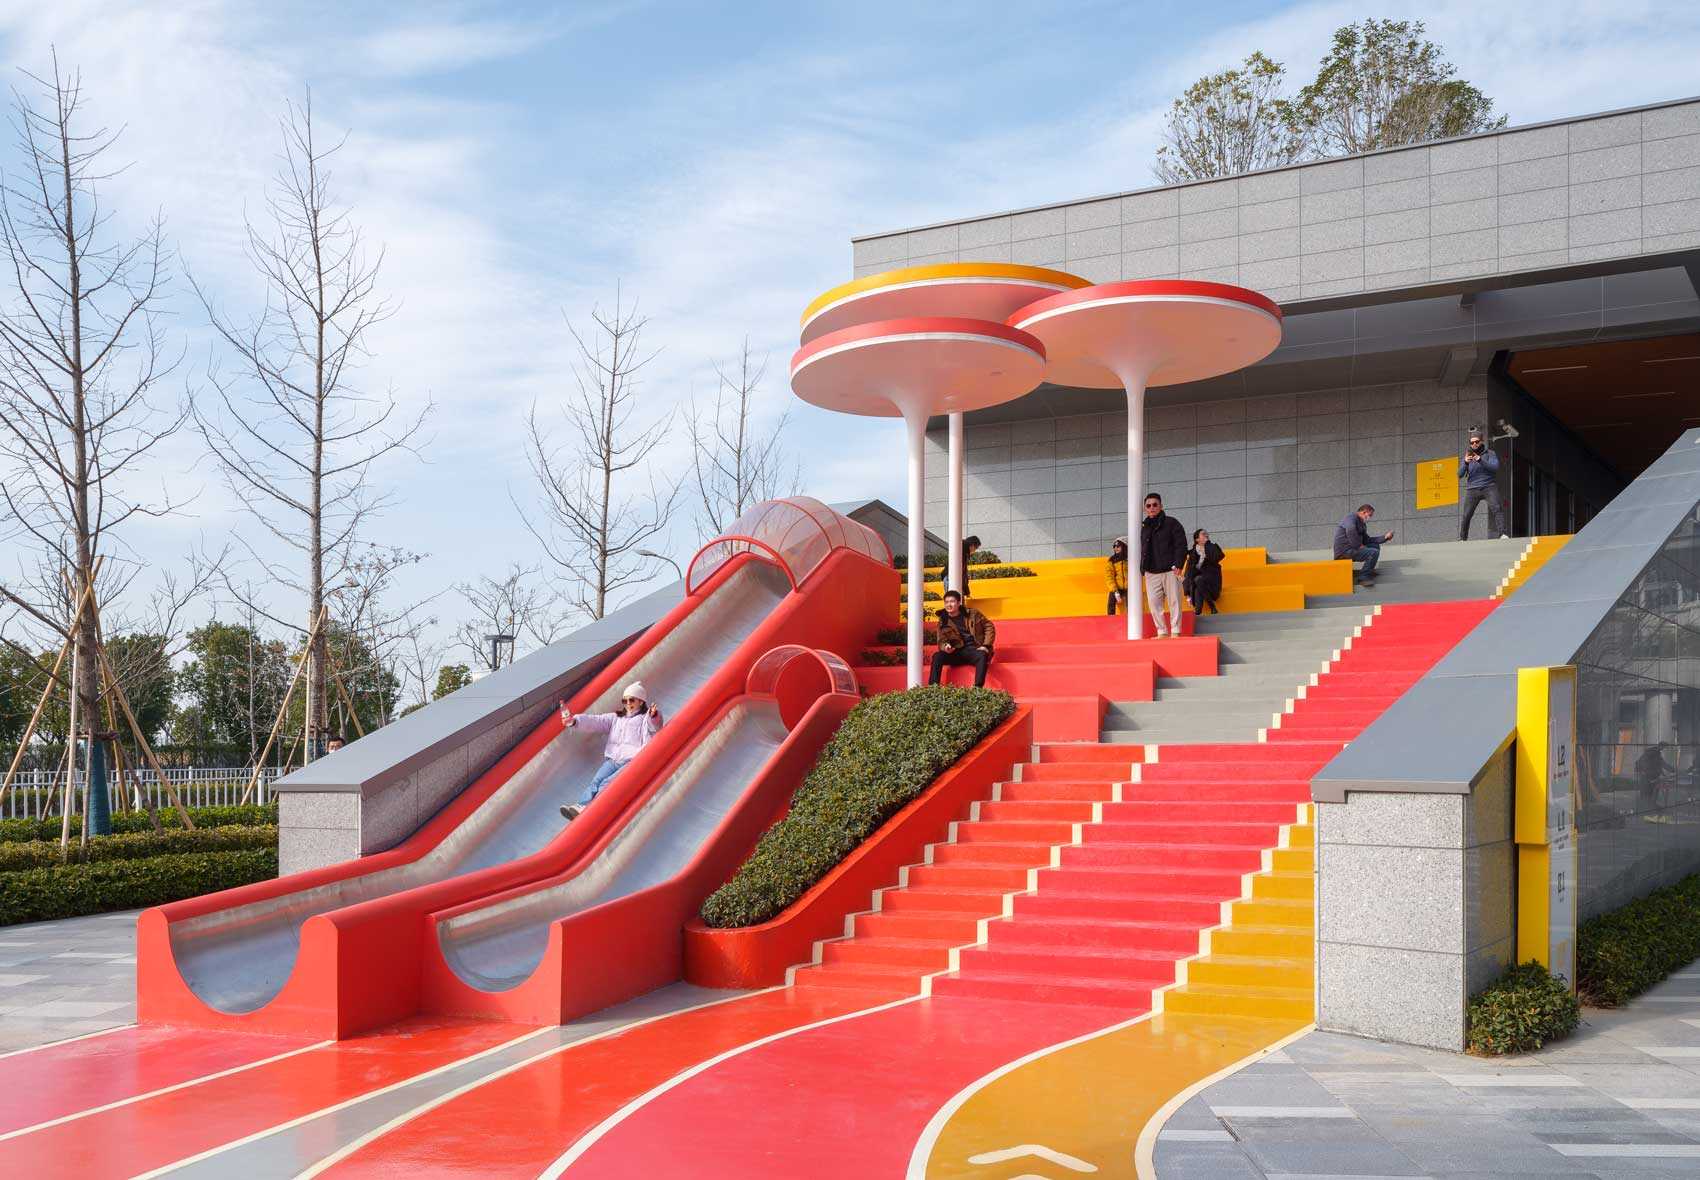 A modern and colorful landscaped park with slides, pathways, a merry-go-round, lounge seating, seesaw, shading structures, seating, swings, and an amphitheater.